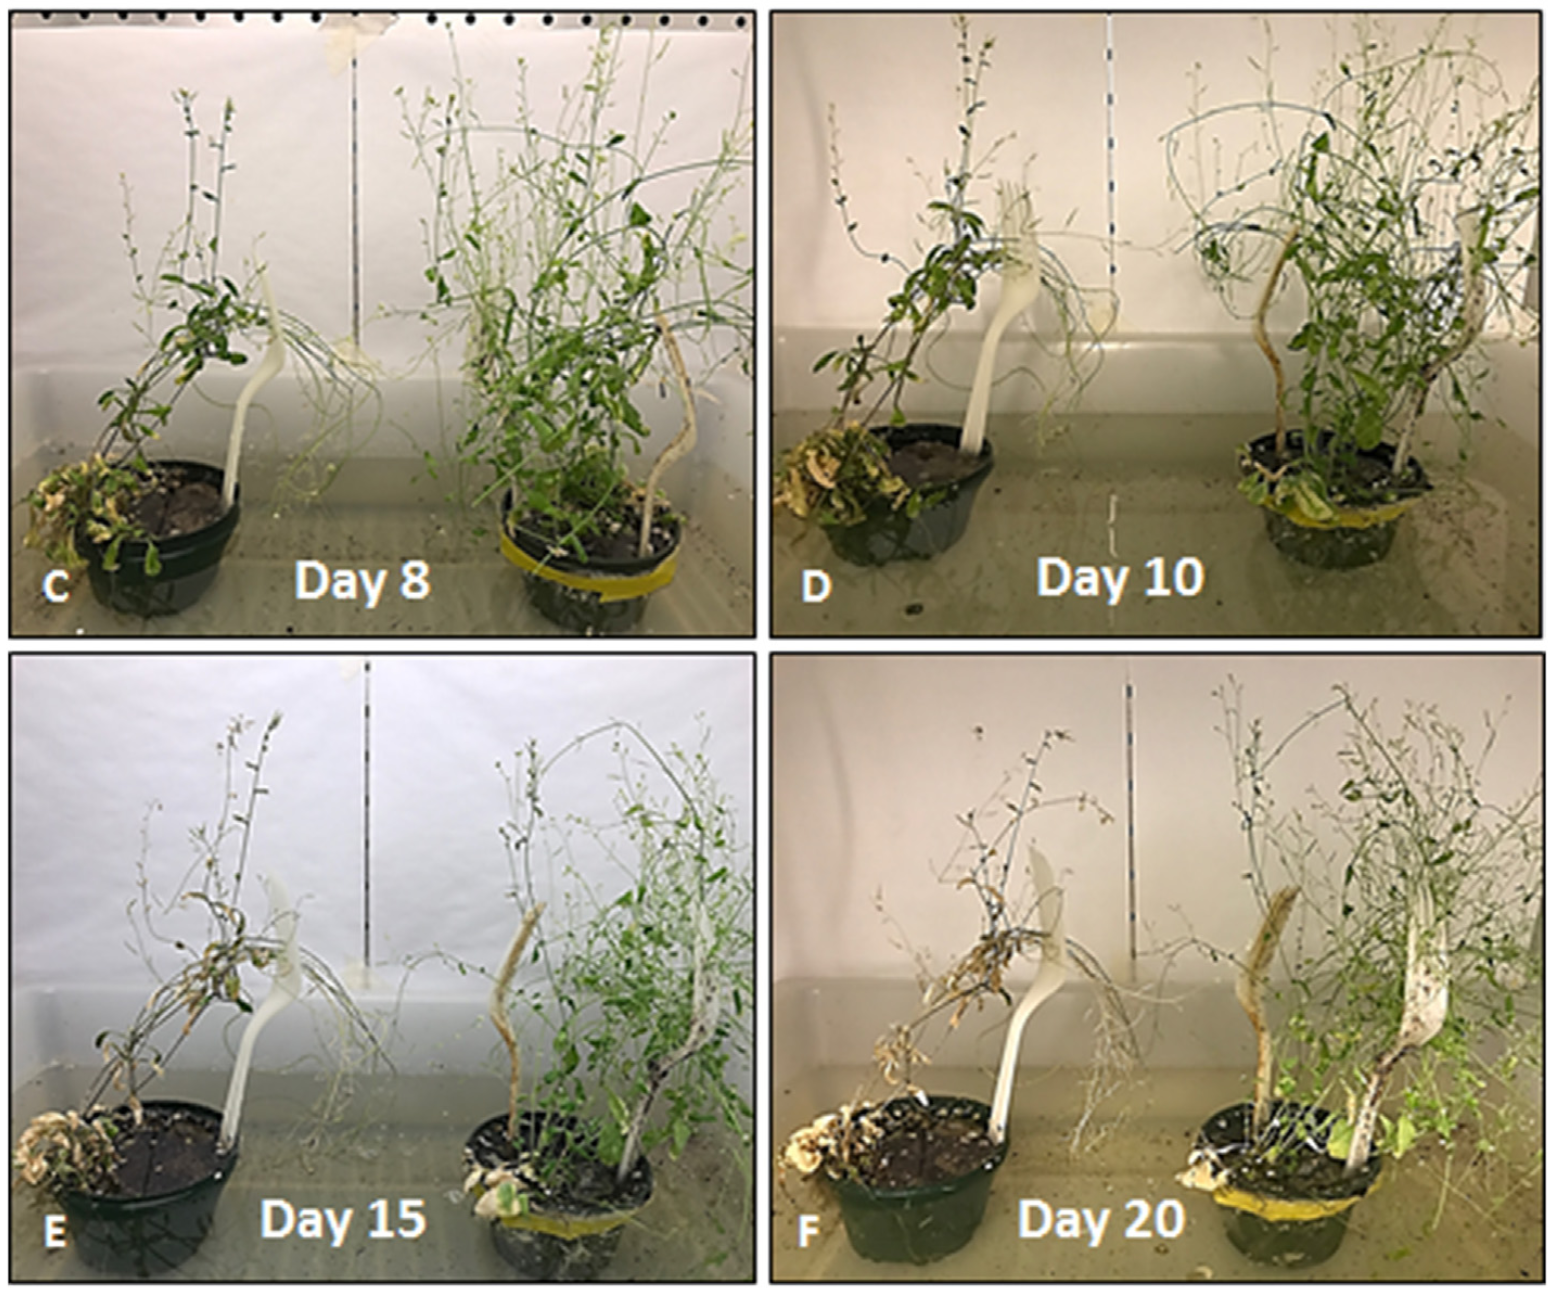 Un-engineered Arabidopsis (left) and Arabidopsis engineered to over-express ACC oxidase (right) in flooded conditions in a climate-controlled growth chamber, compared over time since their roots were submerged in water.